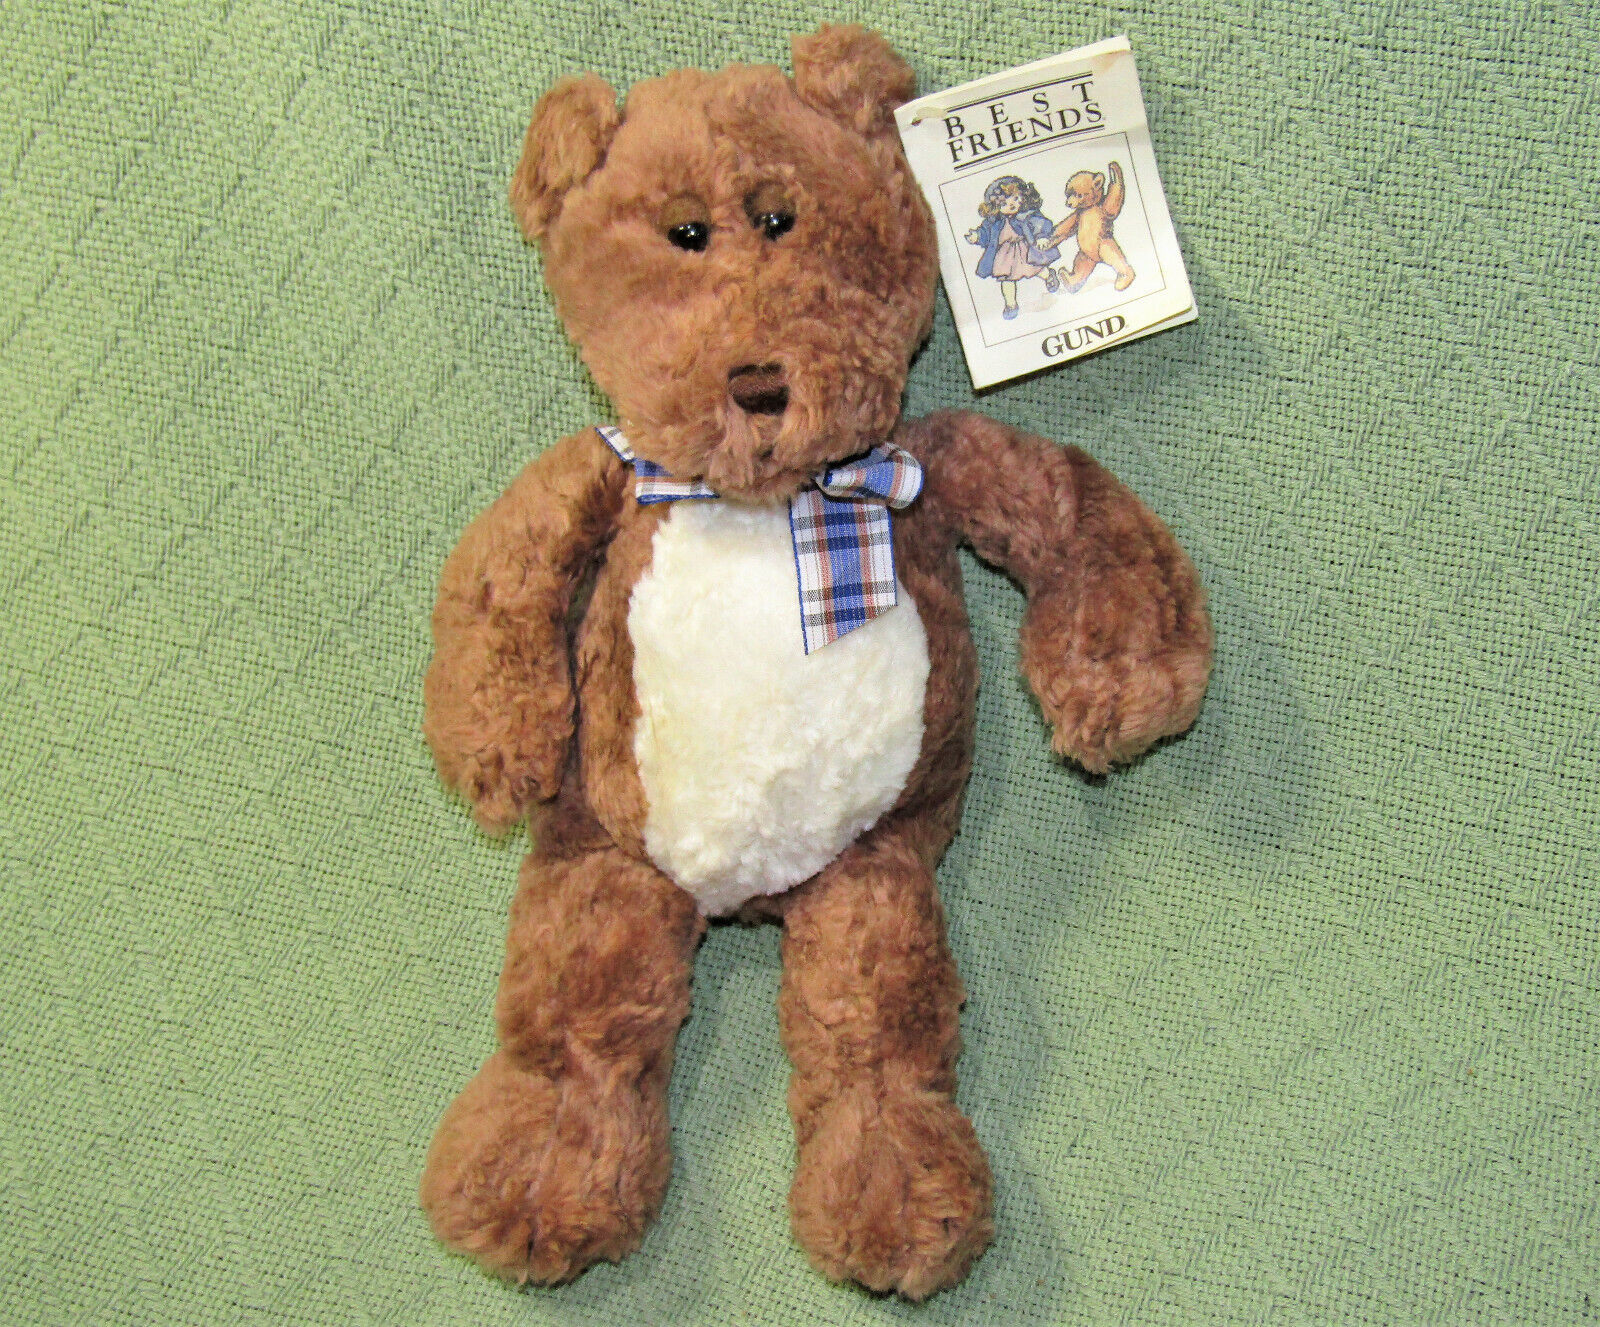 Primary image for GUND BEST FRIENDS TEDDY BEAR 13" PLUSH STUFFED ANIMAL WITH HANG TAG BROWN IVORY